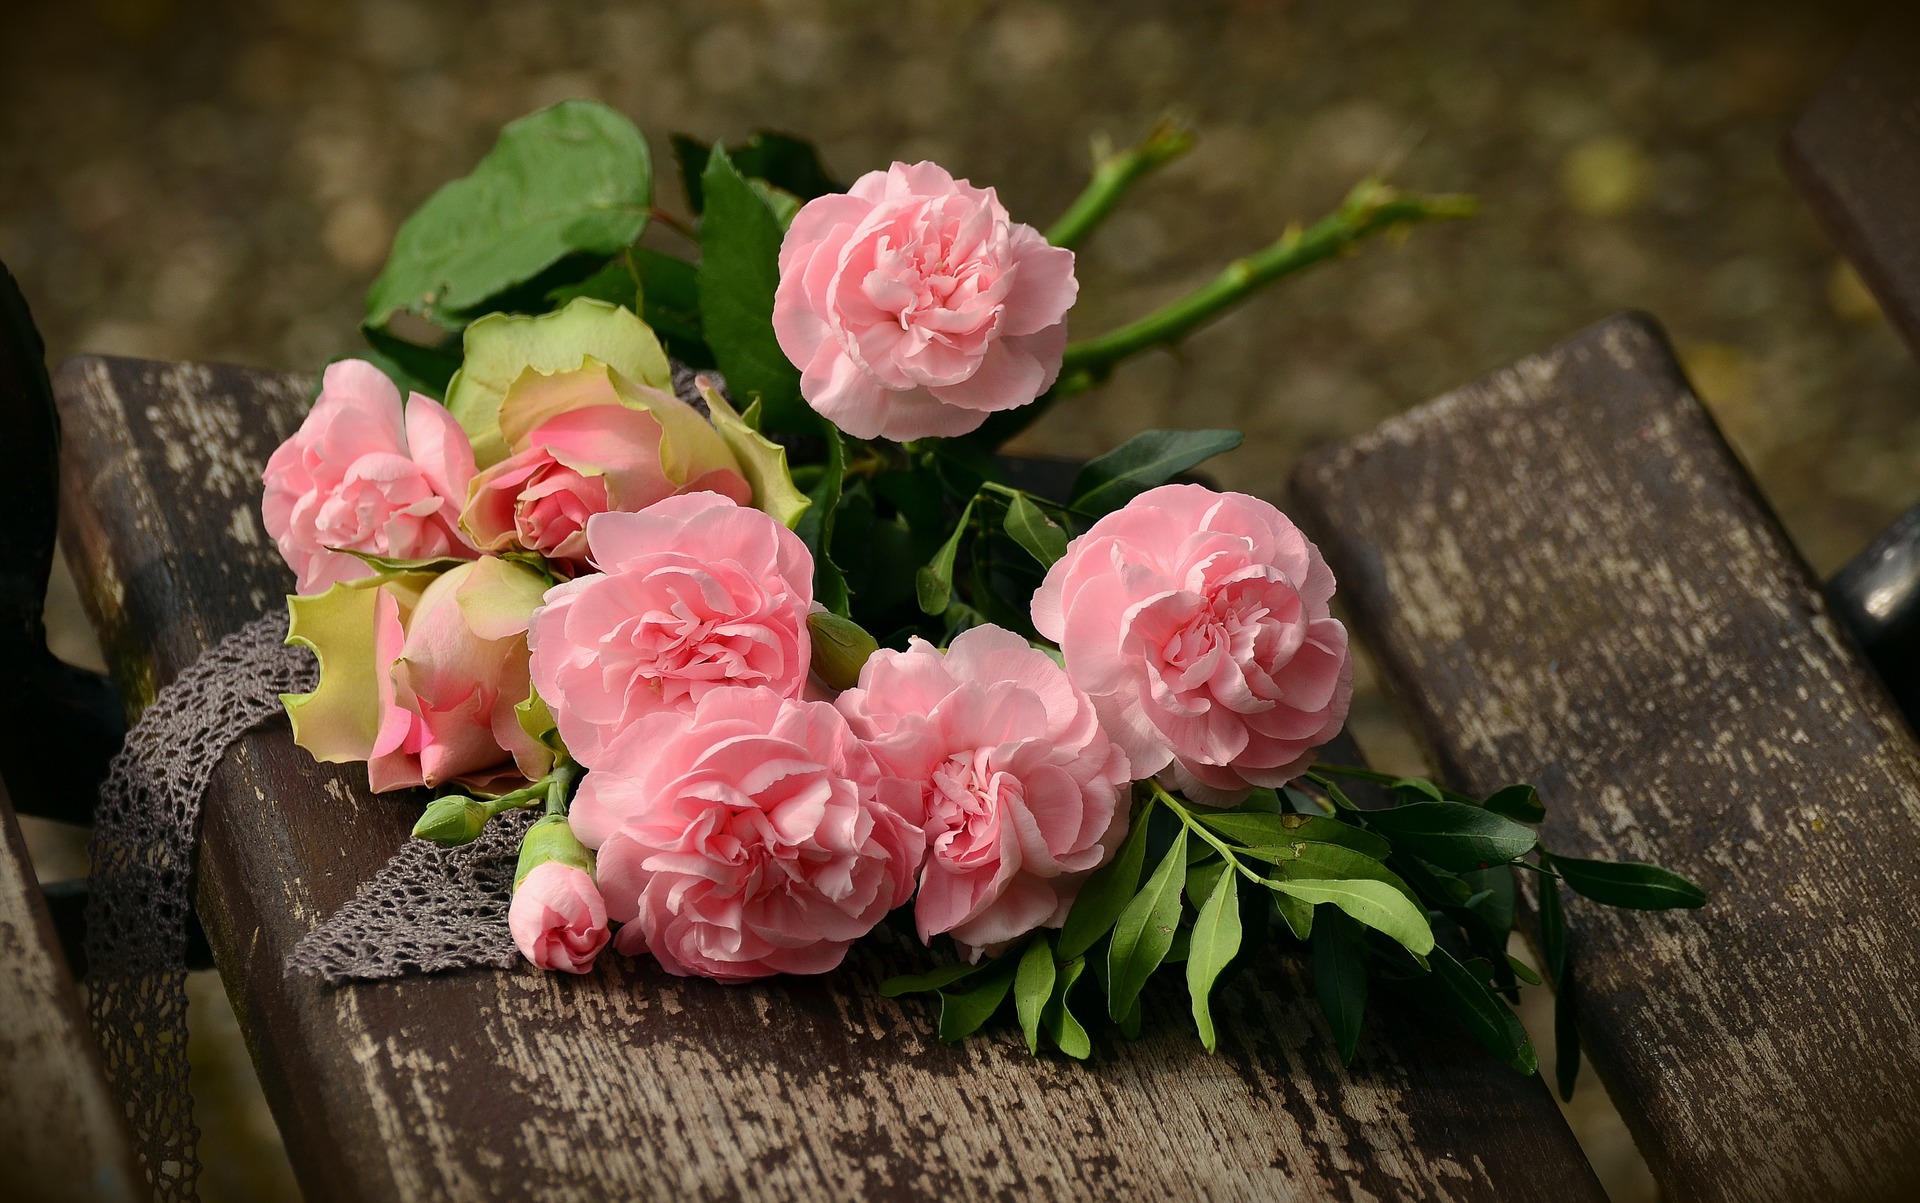 Fresh flowers, Eight baby pink roses and two buds, one slightly open, the other closed, on a wooden bench tied with grey lace fabric